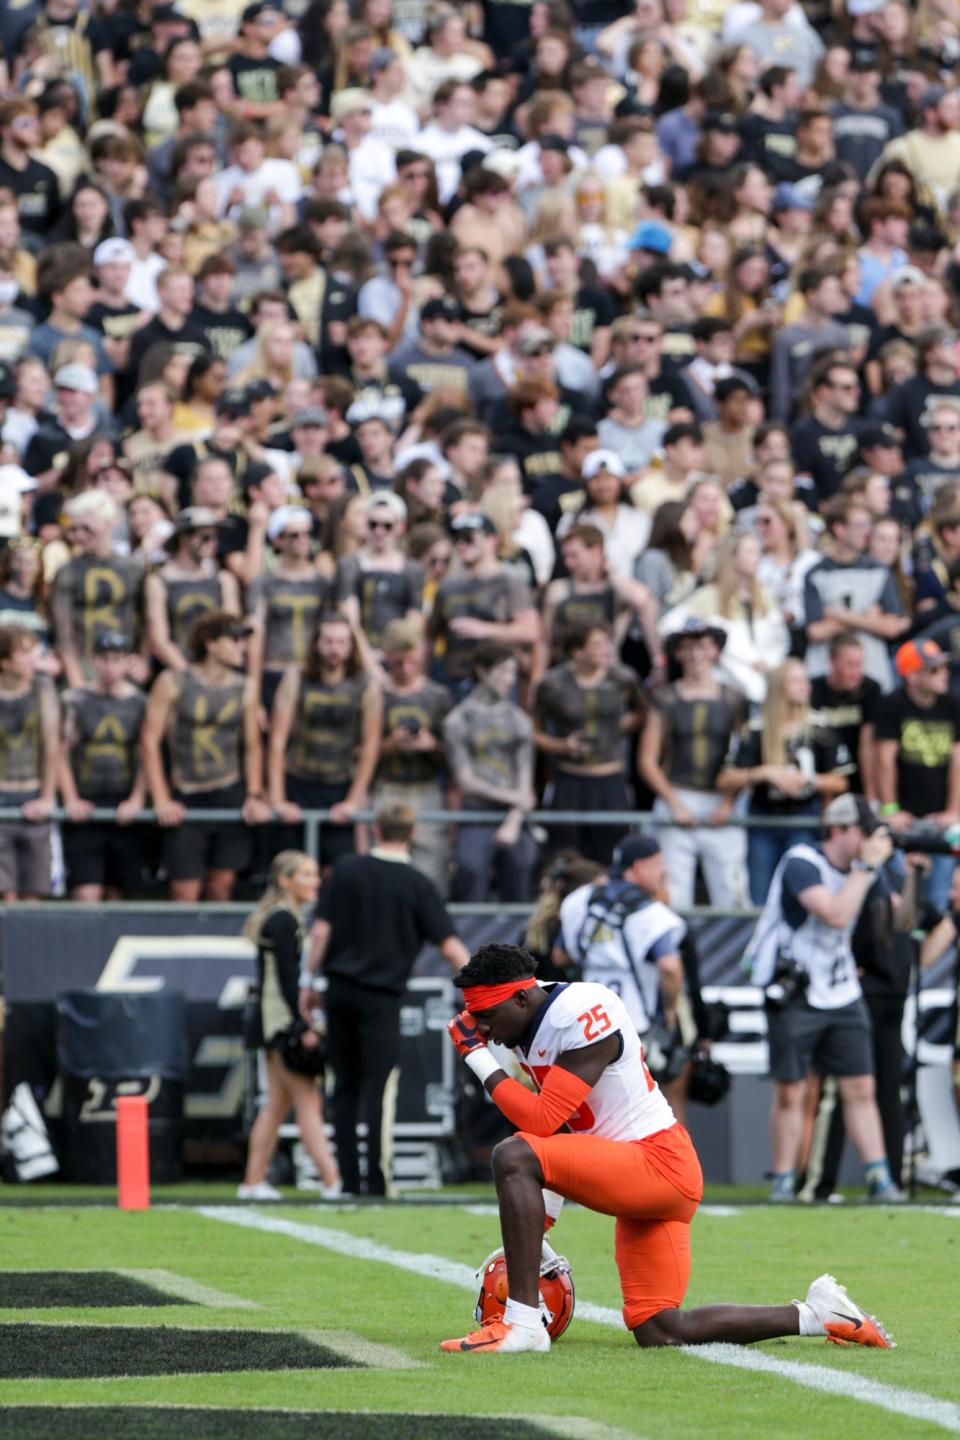 Illinois defensive back Kerby Joseph (25) kneels in the end zone before the first quarter of an NCAA college football game, Saturday, Sept. 25, 2021 at Ross-Ade Stadium in West Lafayette, Ind.